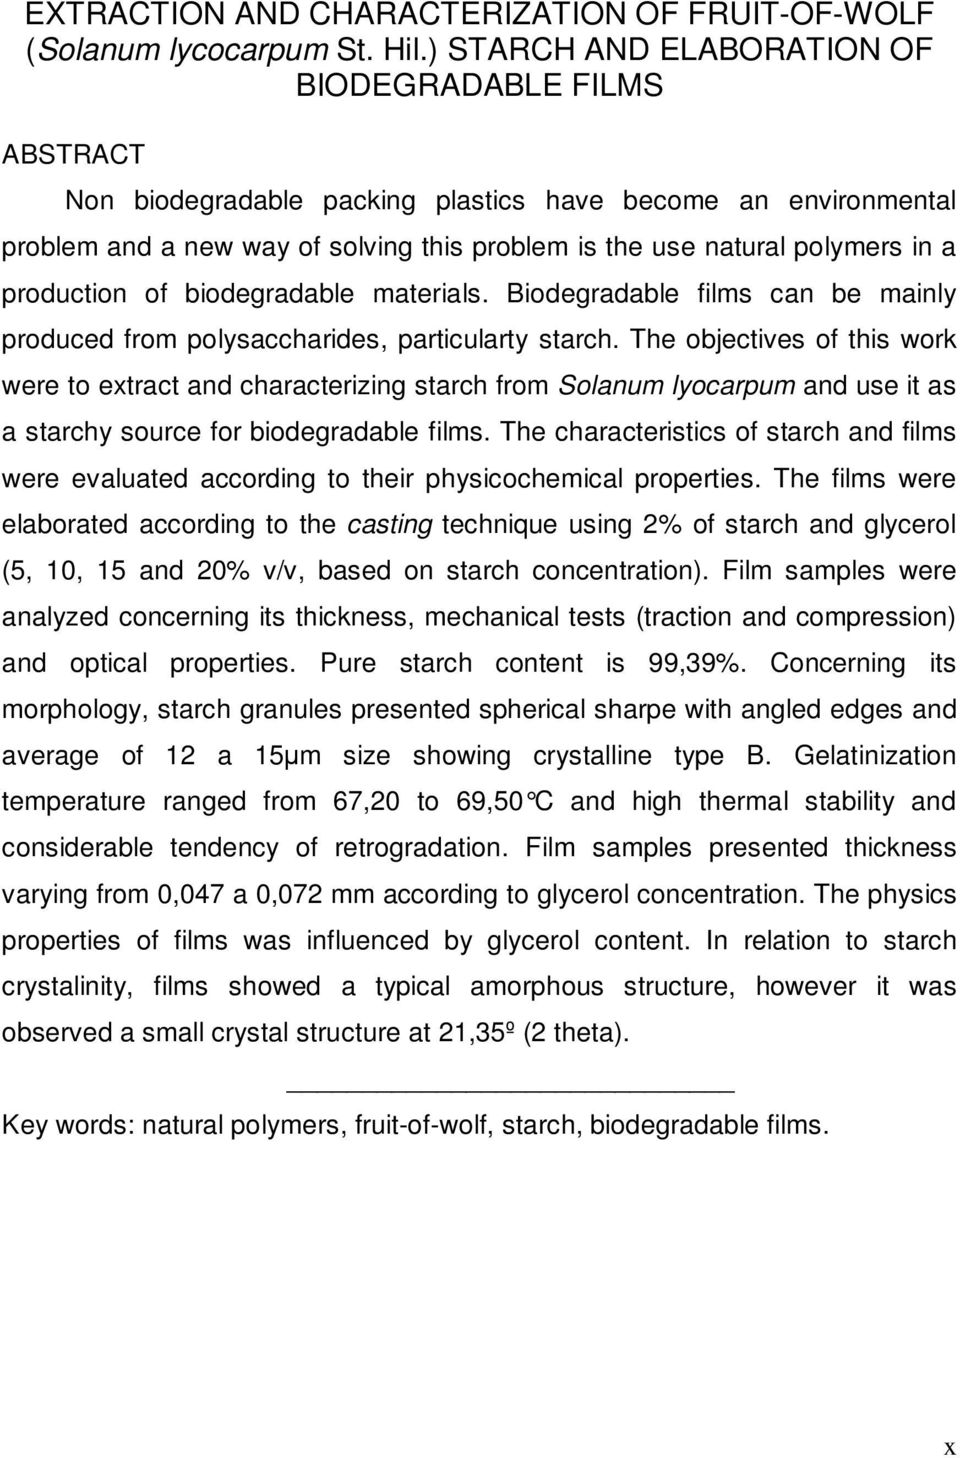 production of biodegradable materials. Biodegradable films can be mainly produced from polysaccharides, particularty starch.